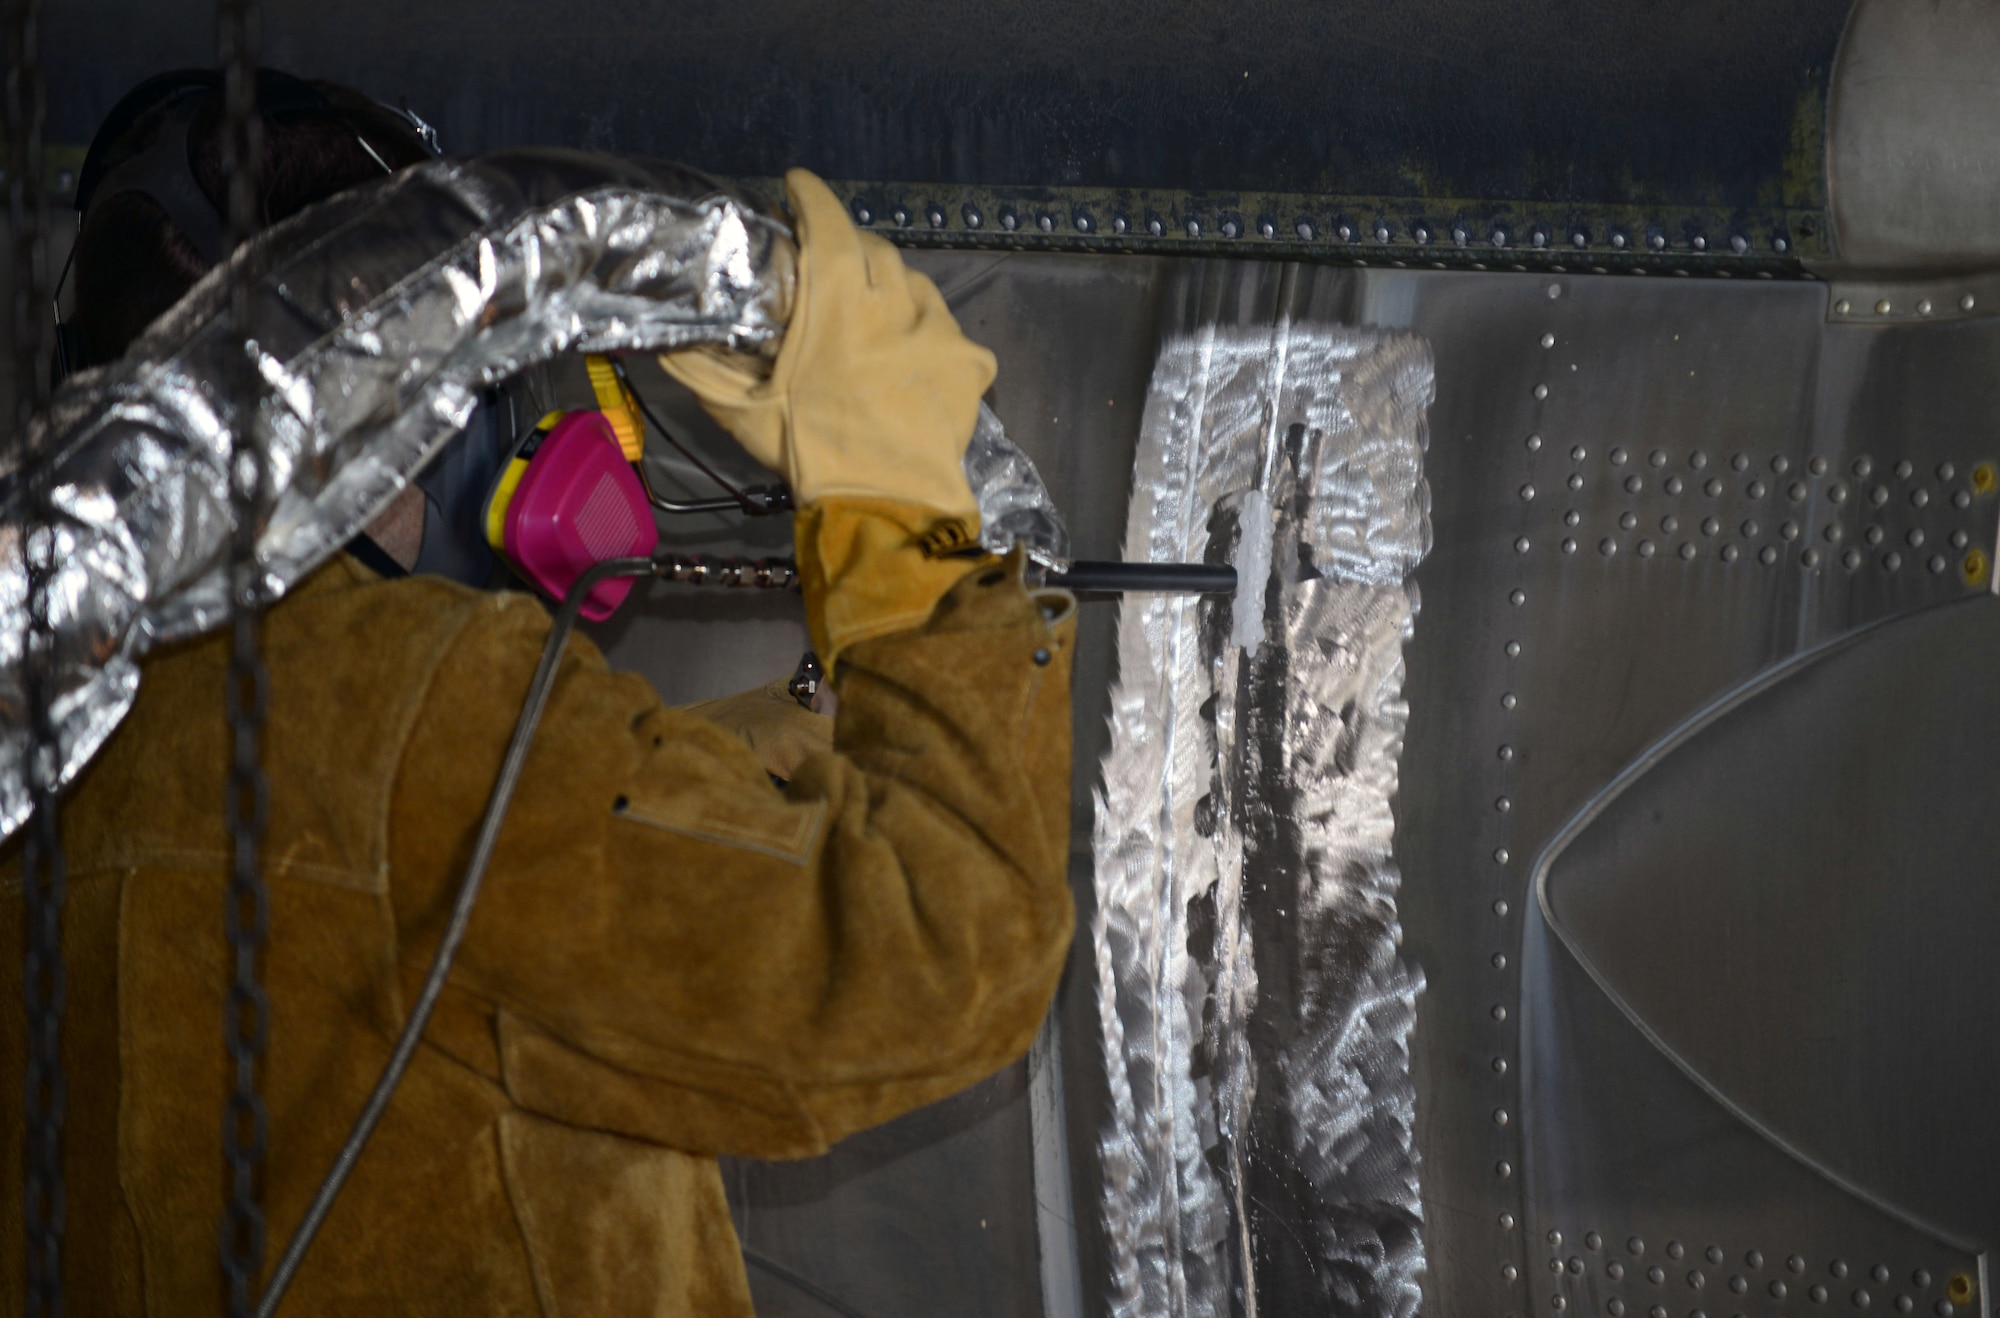 Dustin Blosmo, the chief engineer with VRC Metal Systems, repairs the side of a Martin Marietta HGM-25A Titan I with a mobile Cold Spray machine in Dock 43 at Ellsworth Air Force Base, S.D., June 22, 2017. With this technology, maintainers are able to repair thinner metals that traditional welding would not be able to do, allowing them to restore previously unrepairable objects. (U.S. Air Force photo by Airman 1st Class Donald C. Knechtel)